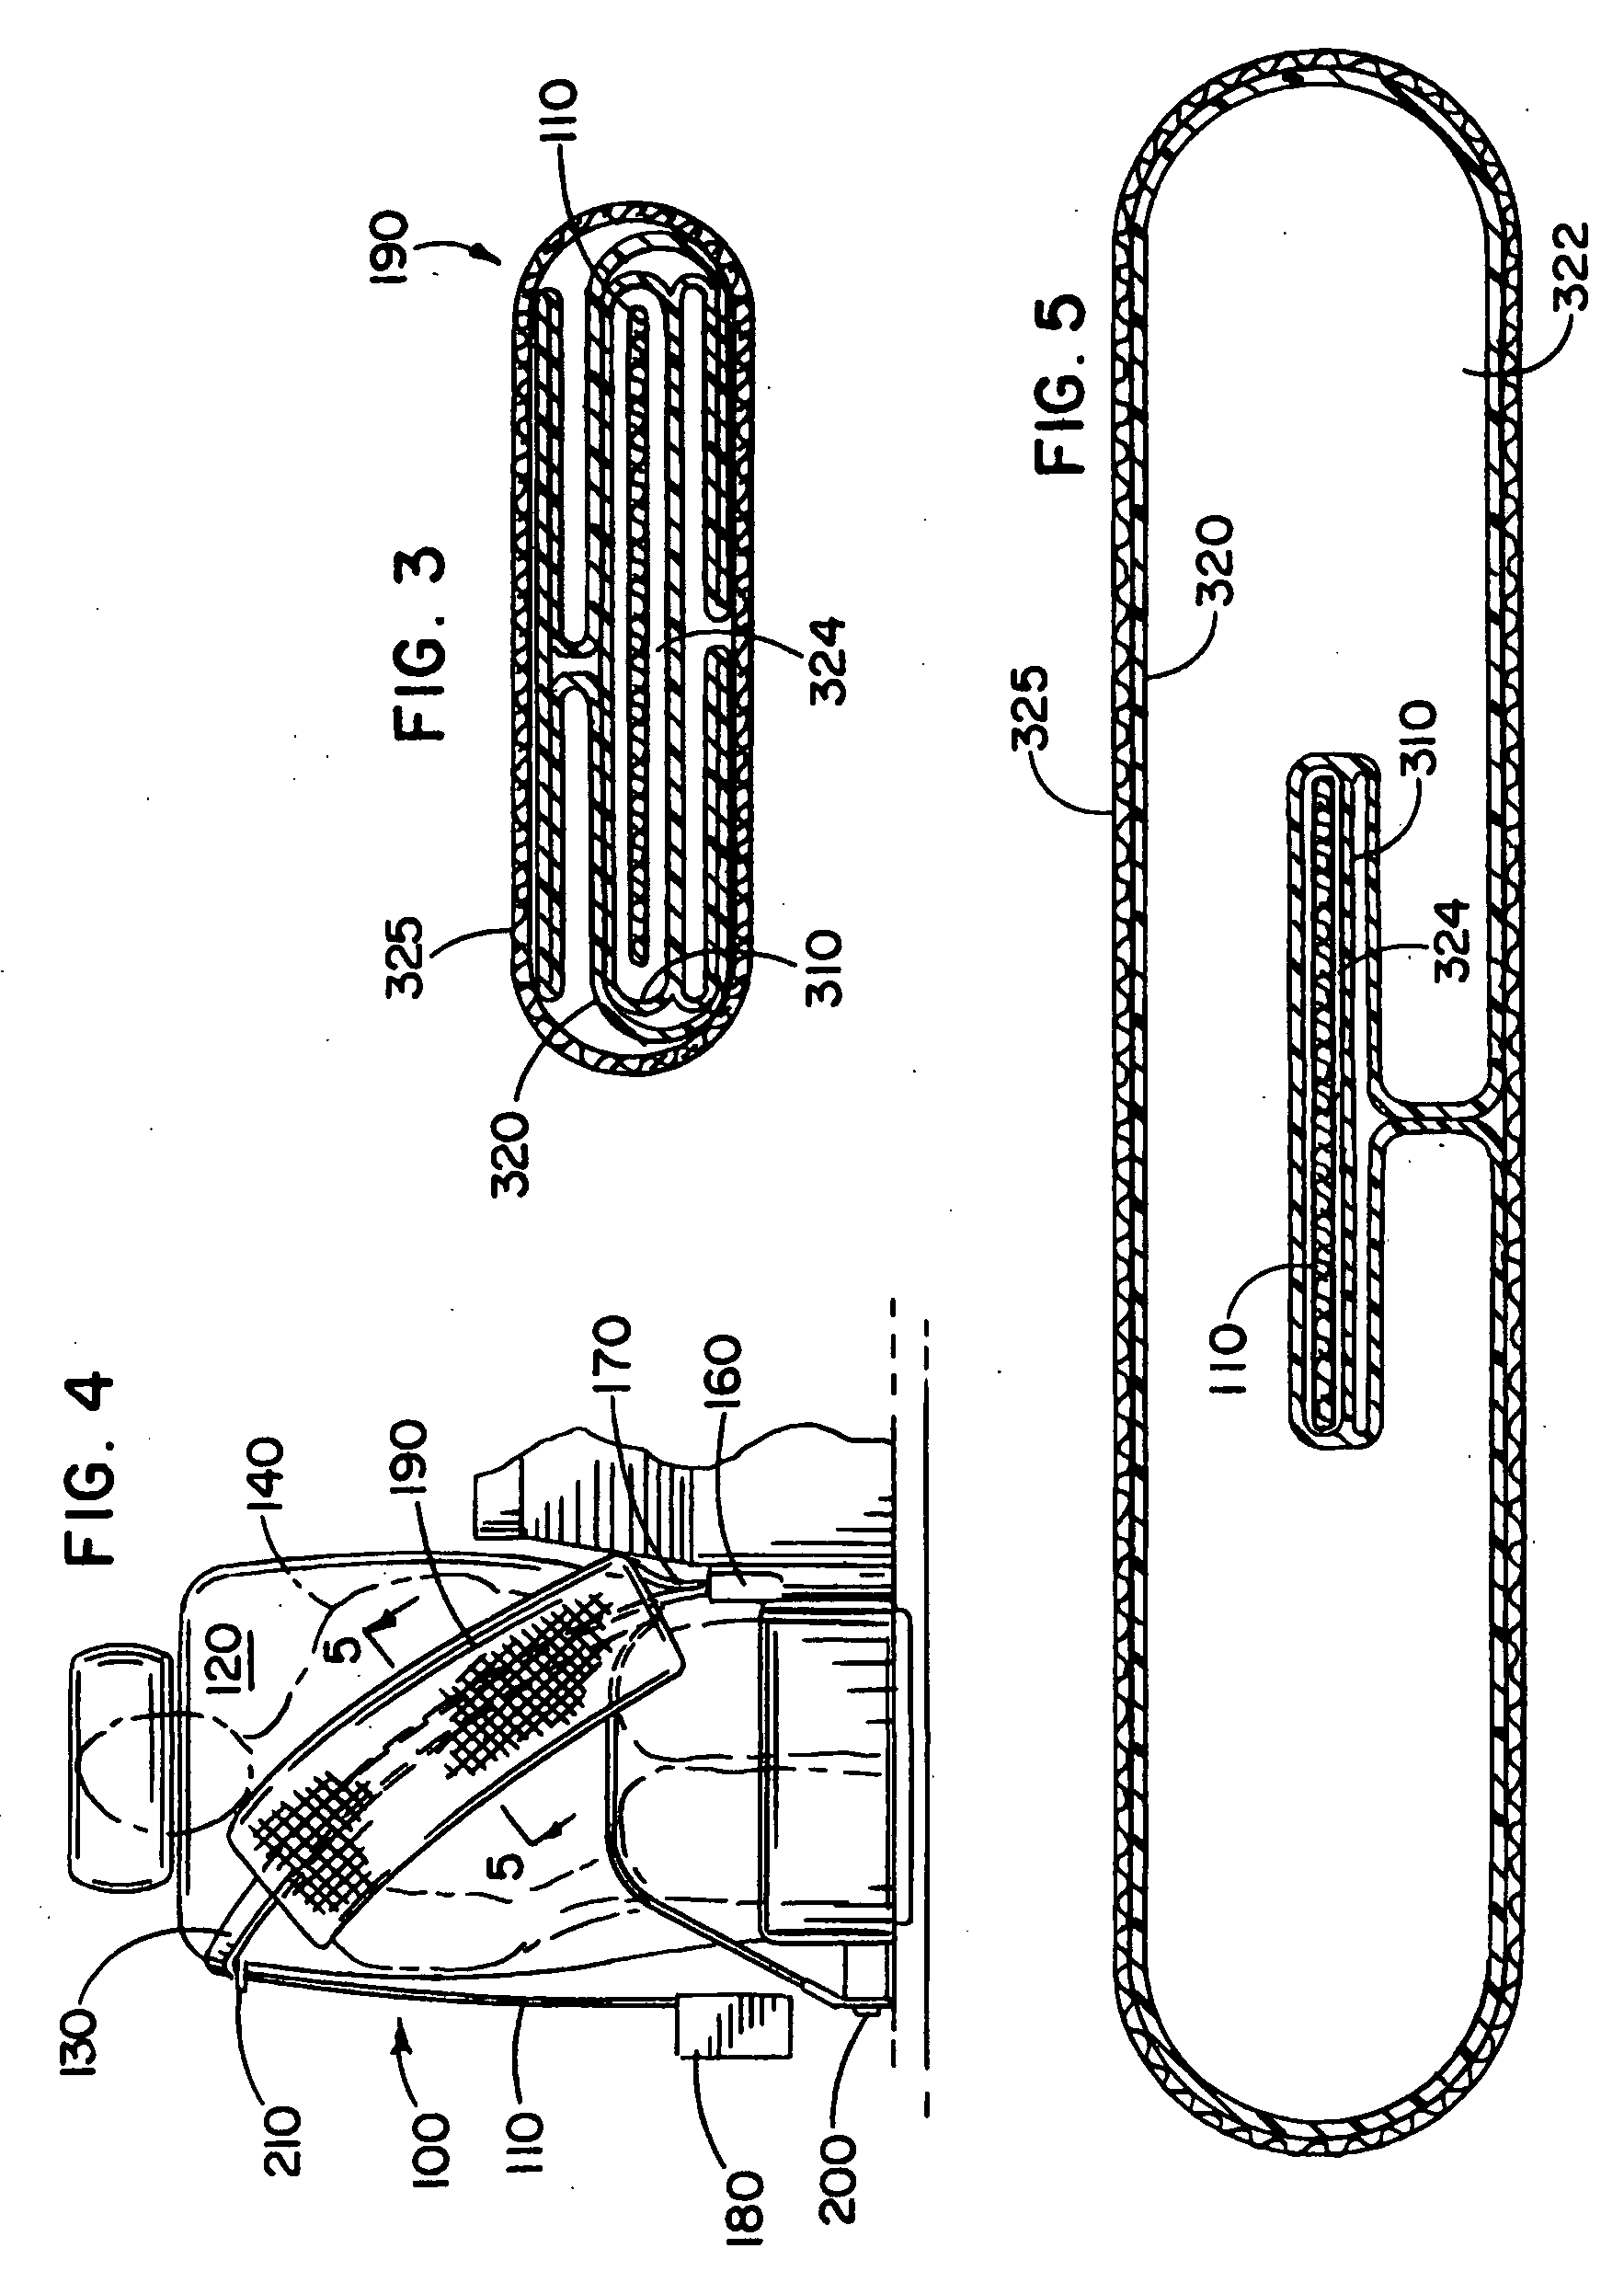 Seat belt system including an airbag